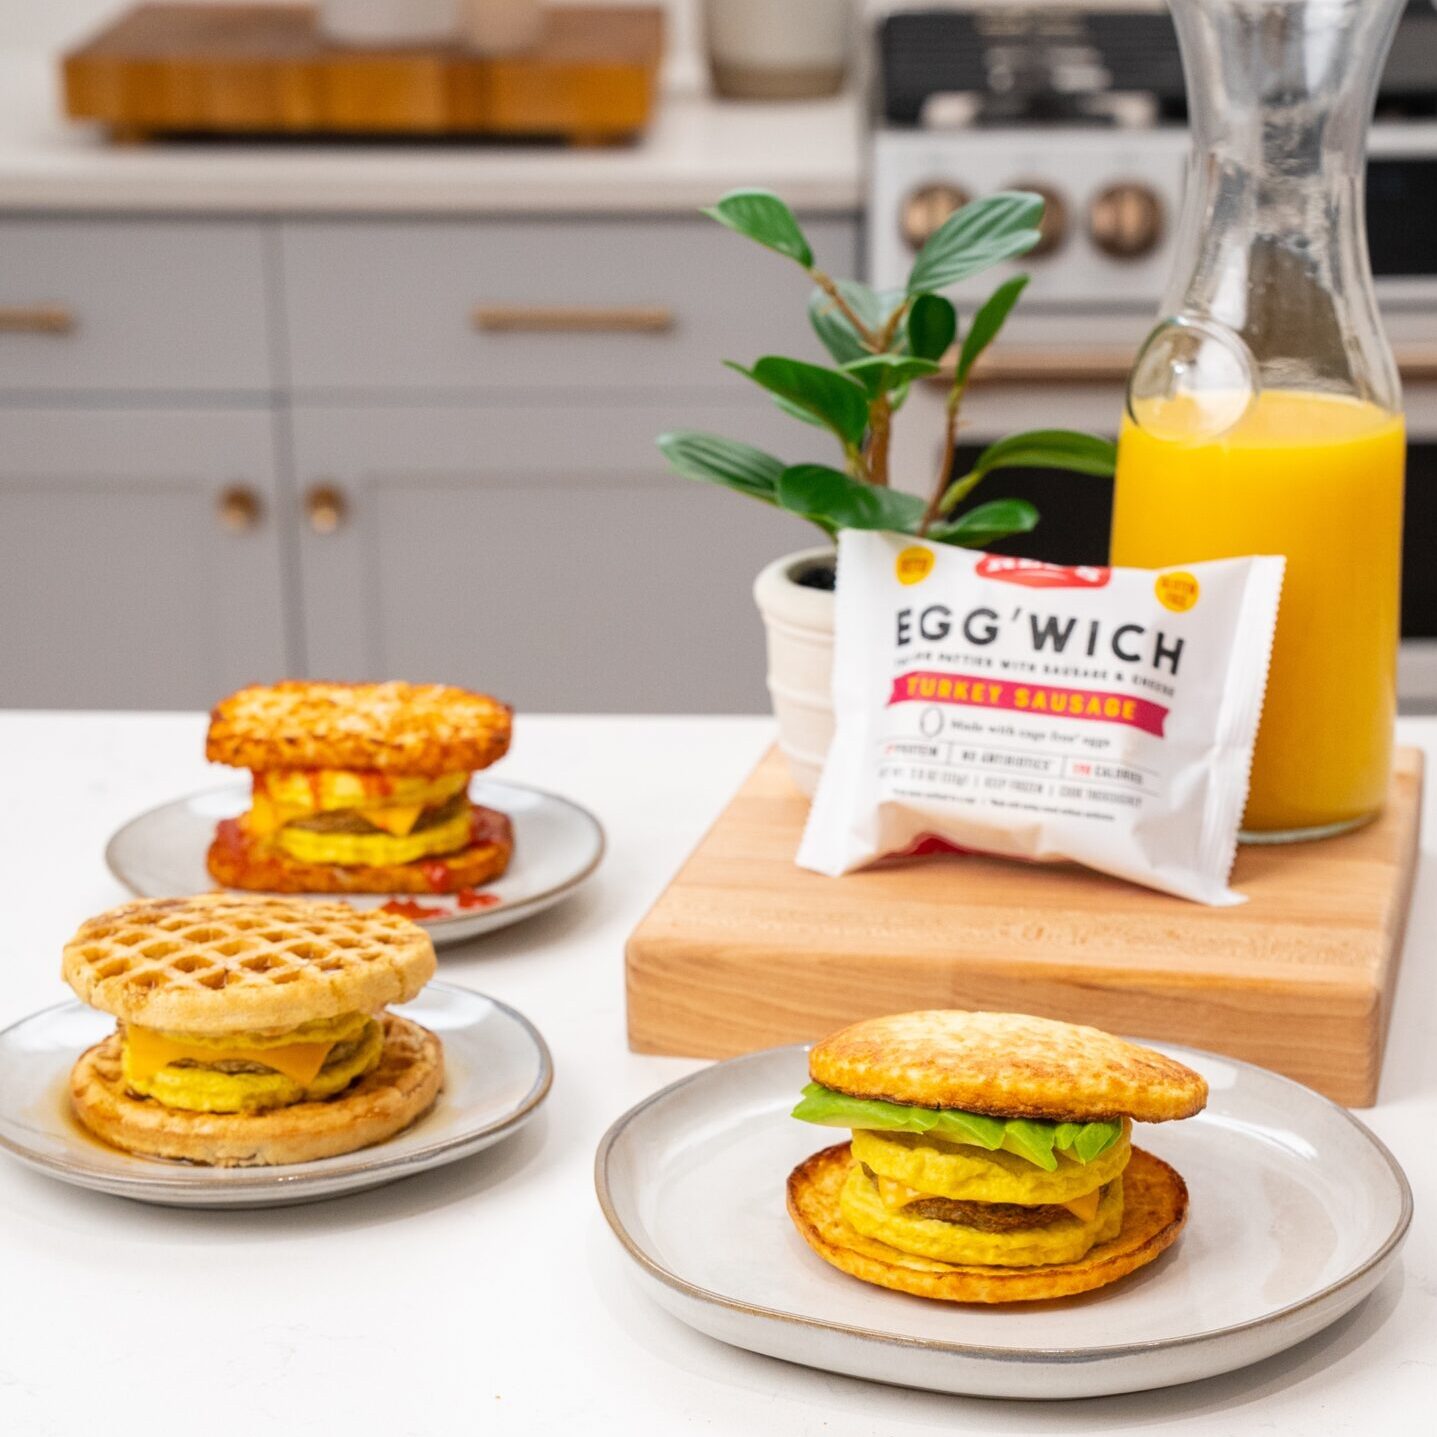 Egg'Wich Breakfast Sandwiches with hashbrowns, waffles and caulifower thins